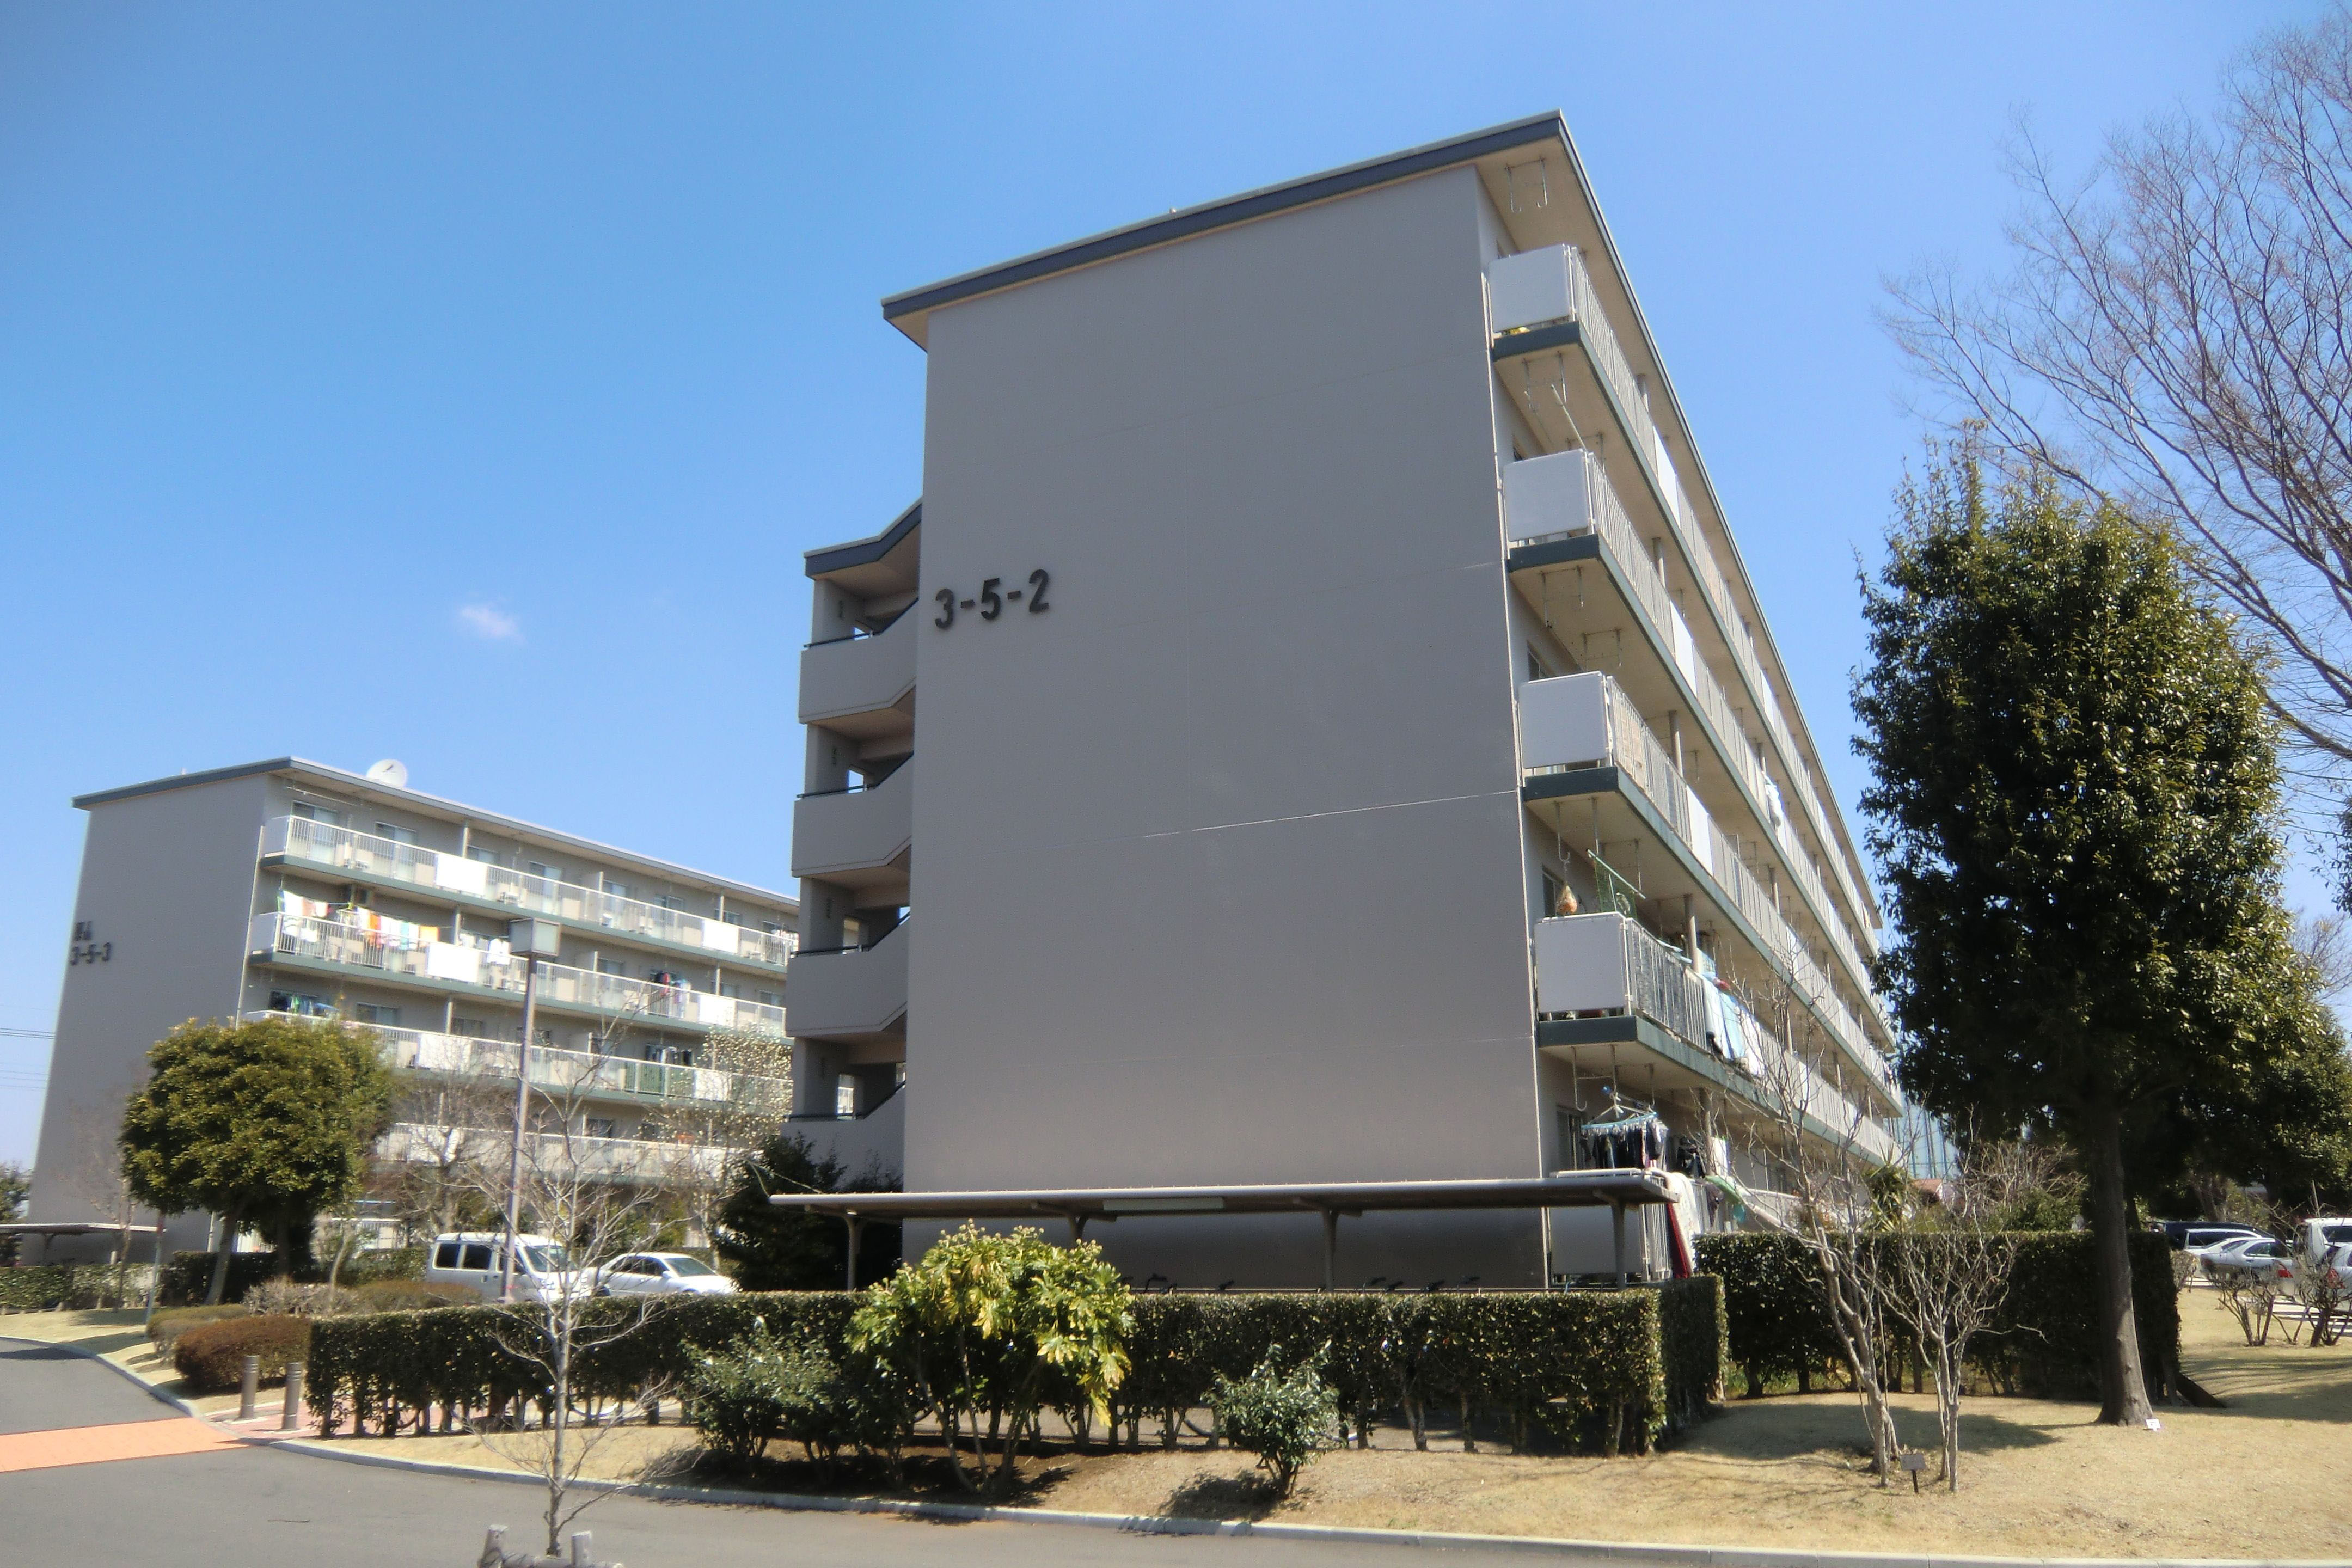 Not long now: These condos in Chiba Prefecture were built in 1988 by the Japan Housing Corporation, which means that, according to government projections, they are 'due' to be rebuilt by 2028. | PHILIP BRASOR